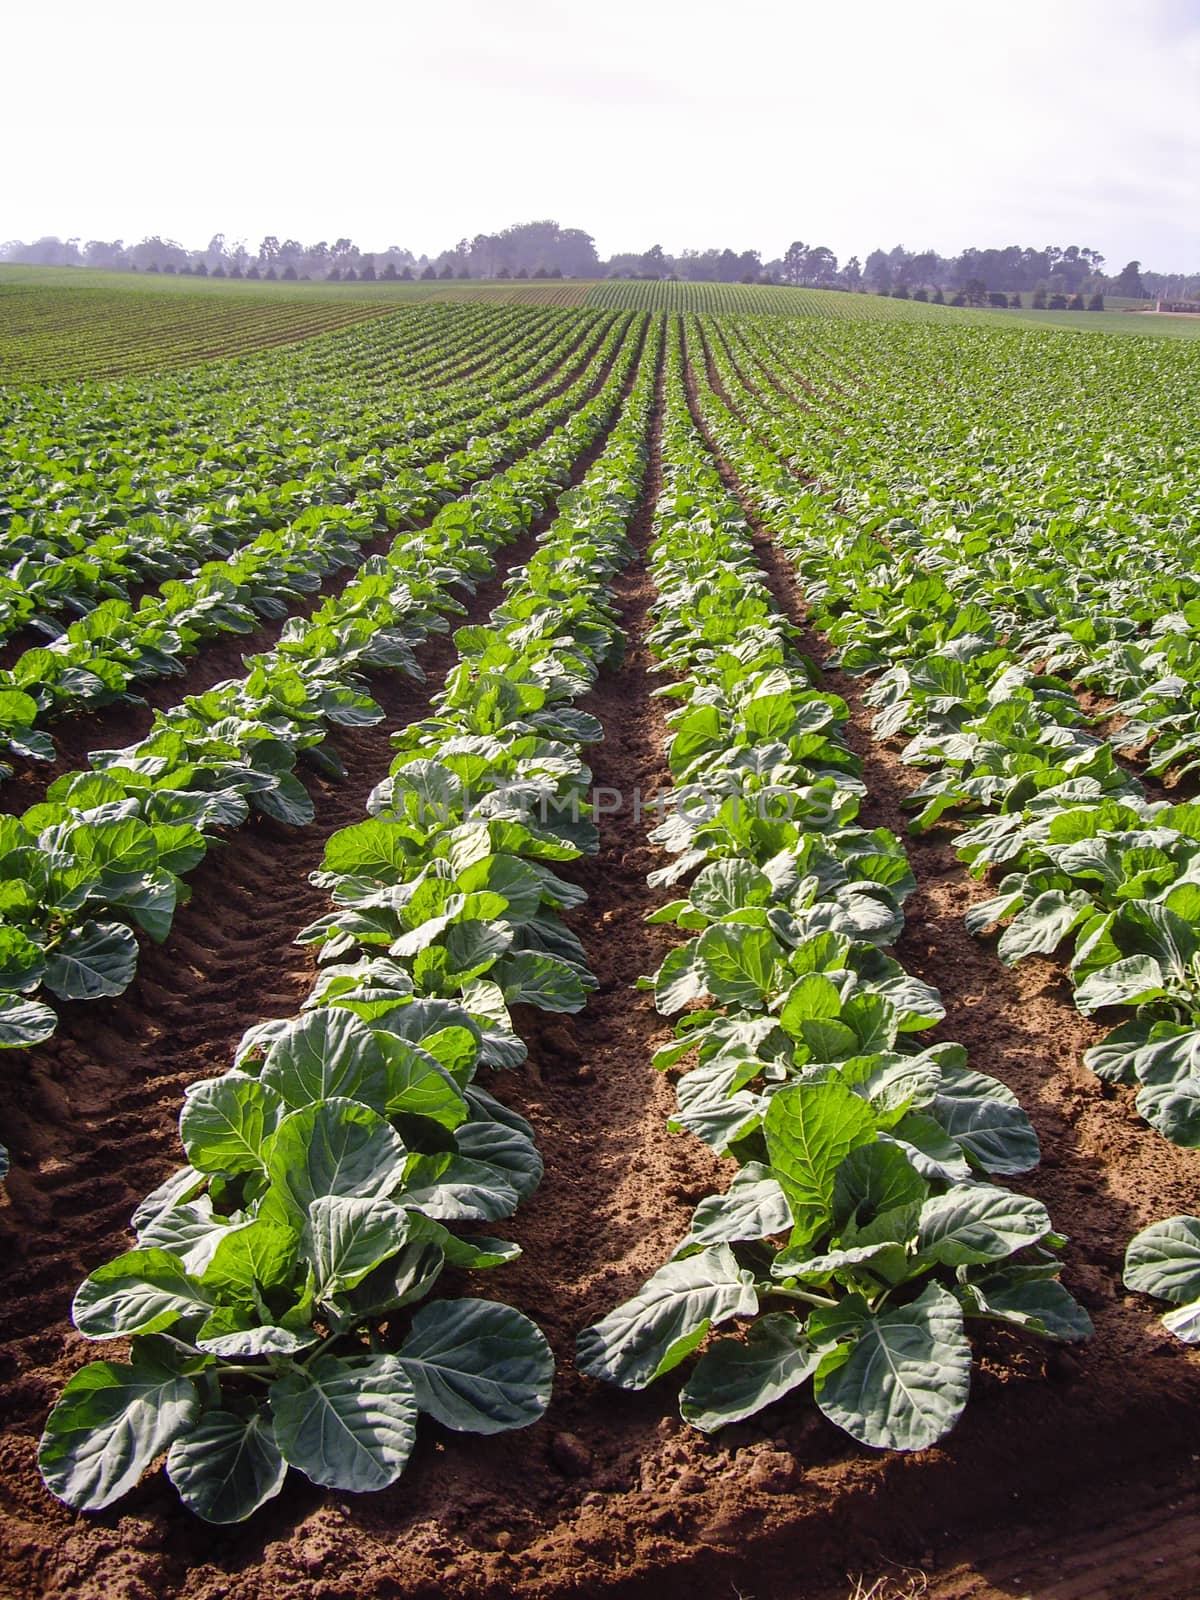 Crop of Brussels Sprouts in California